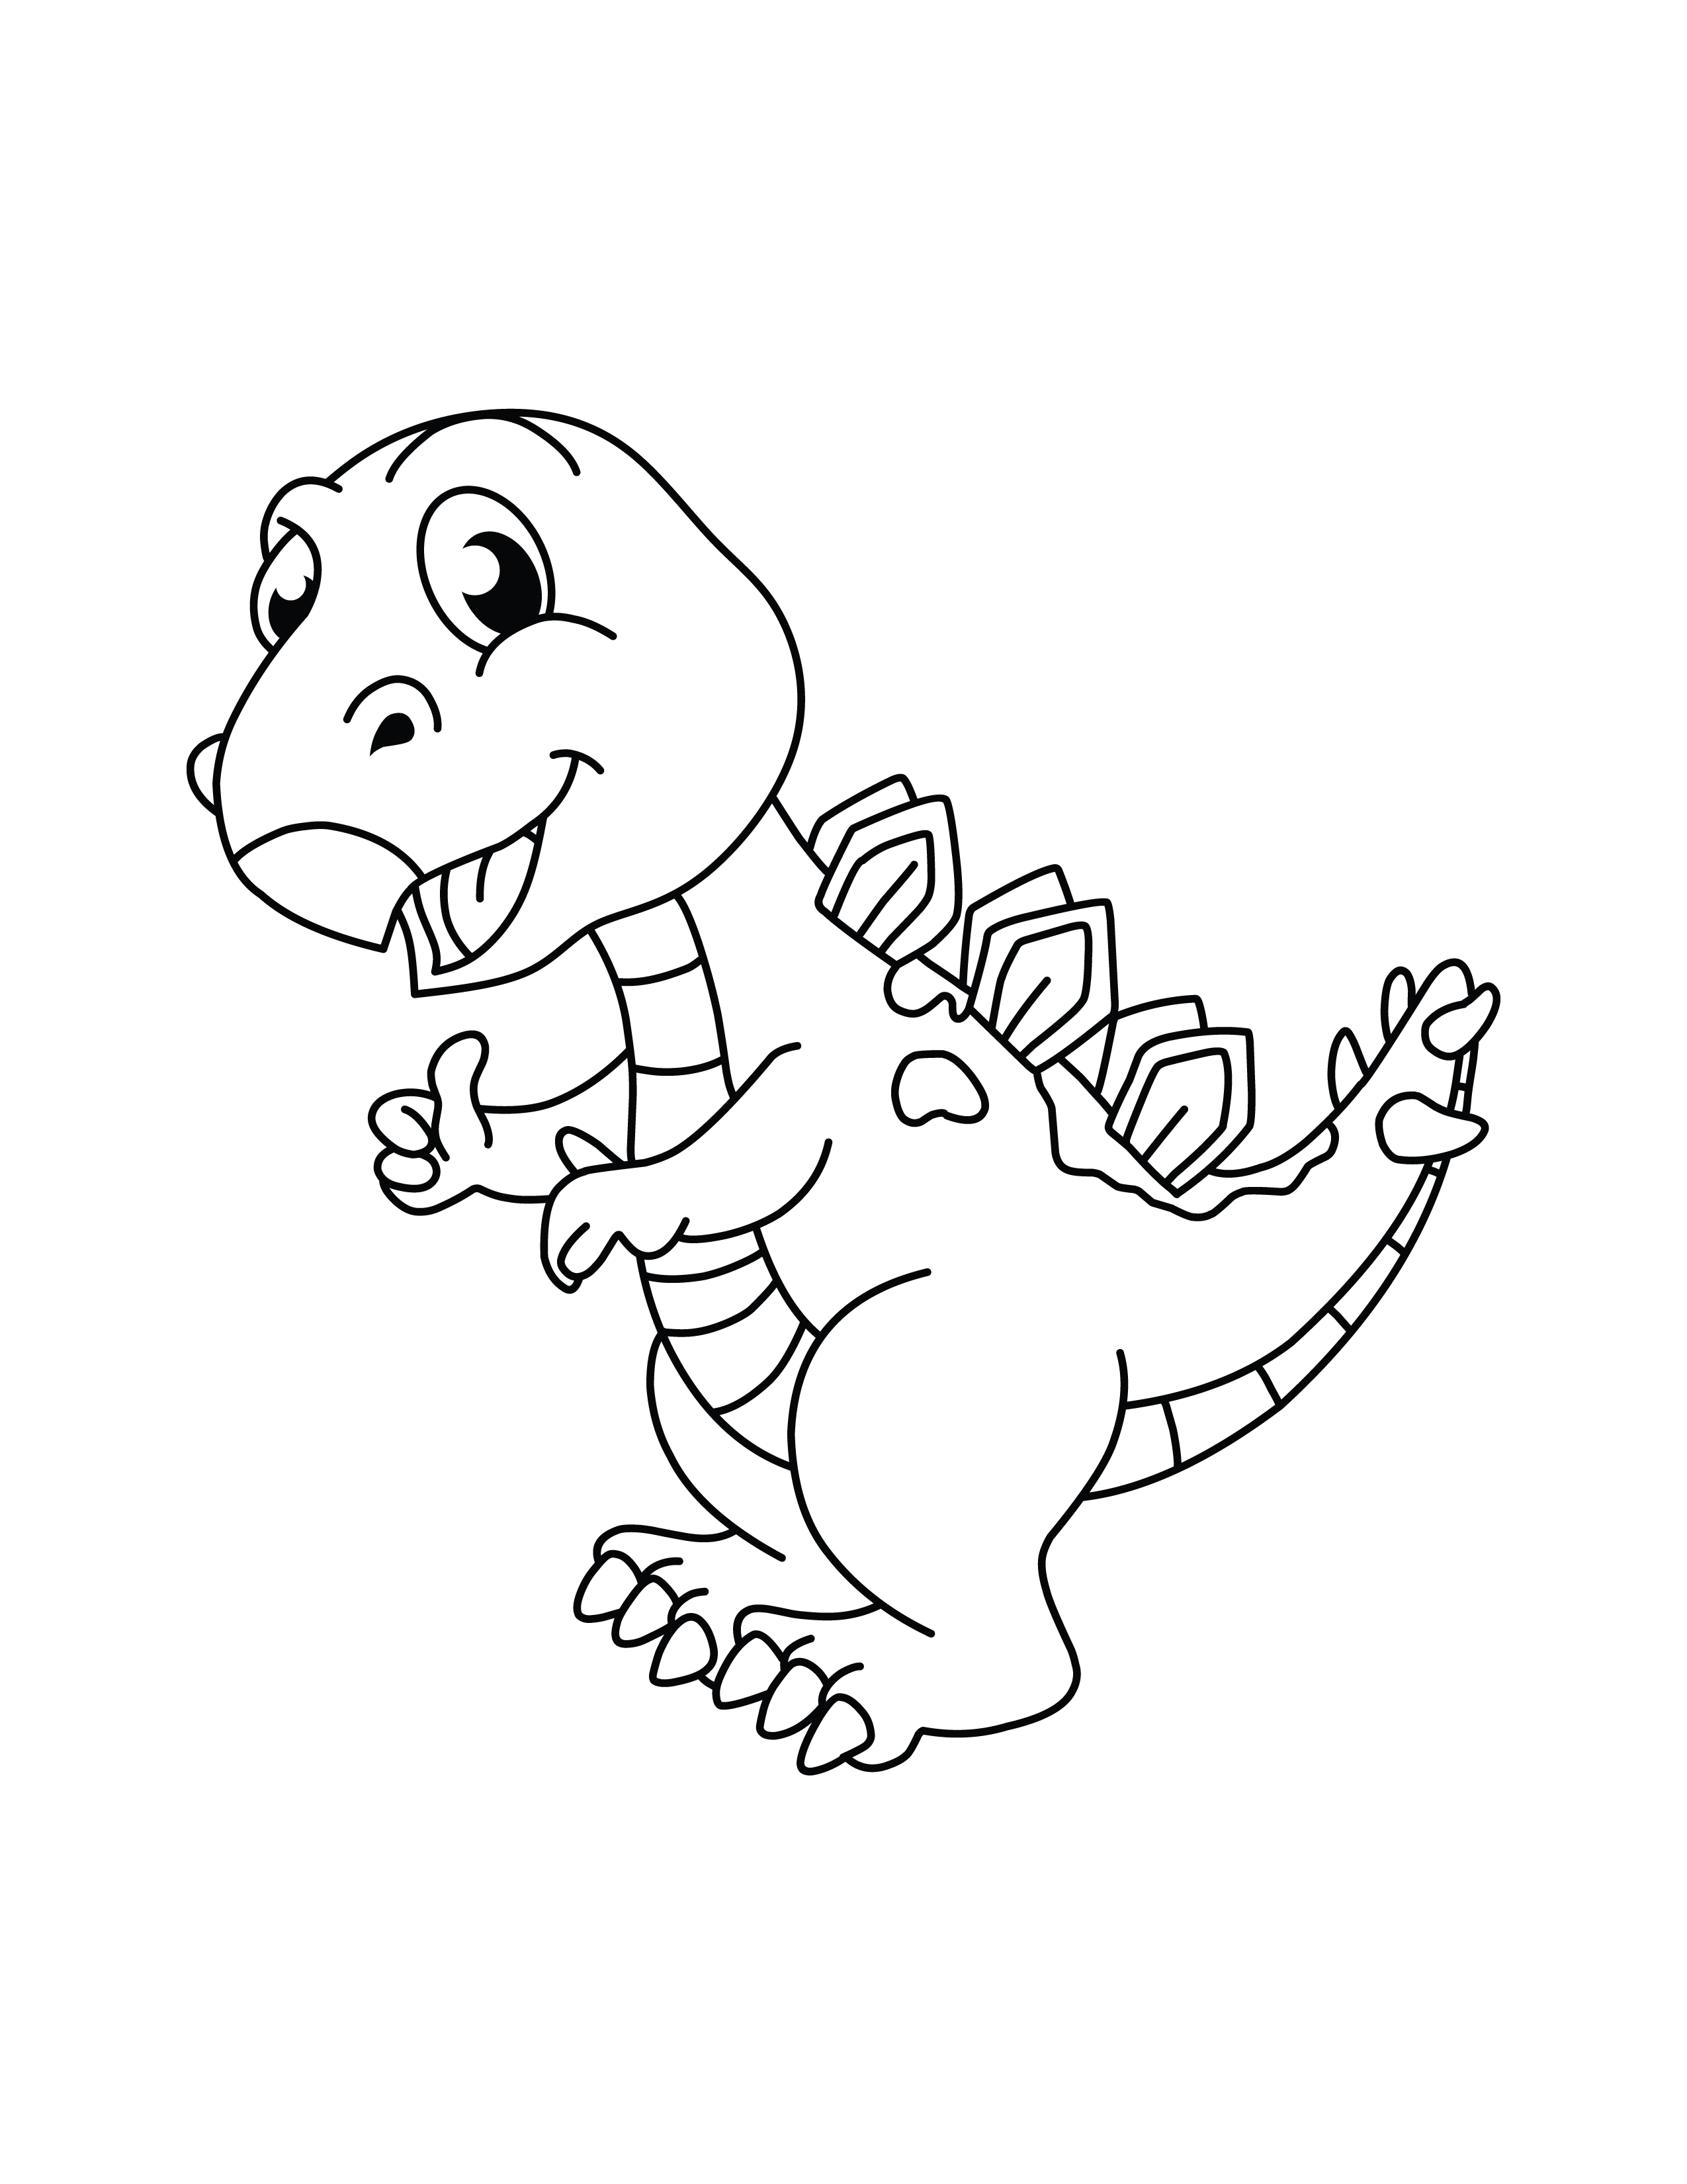 Cute dinosaur coloring pages for kids